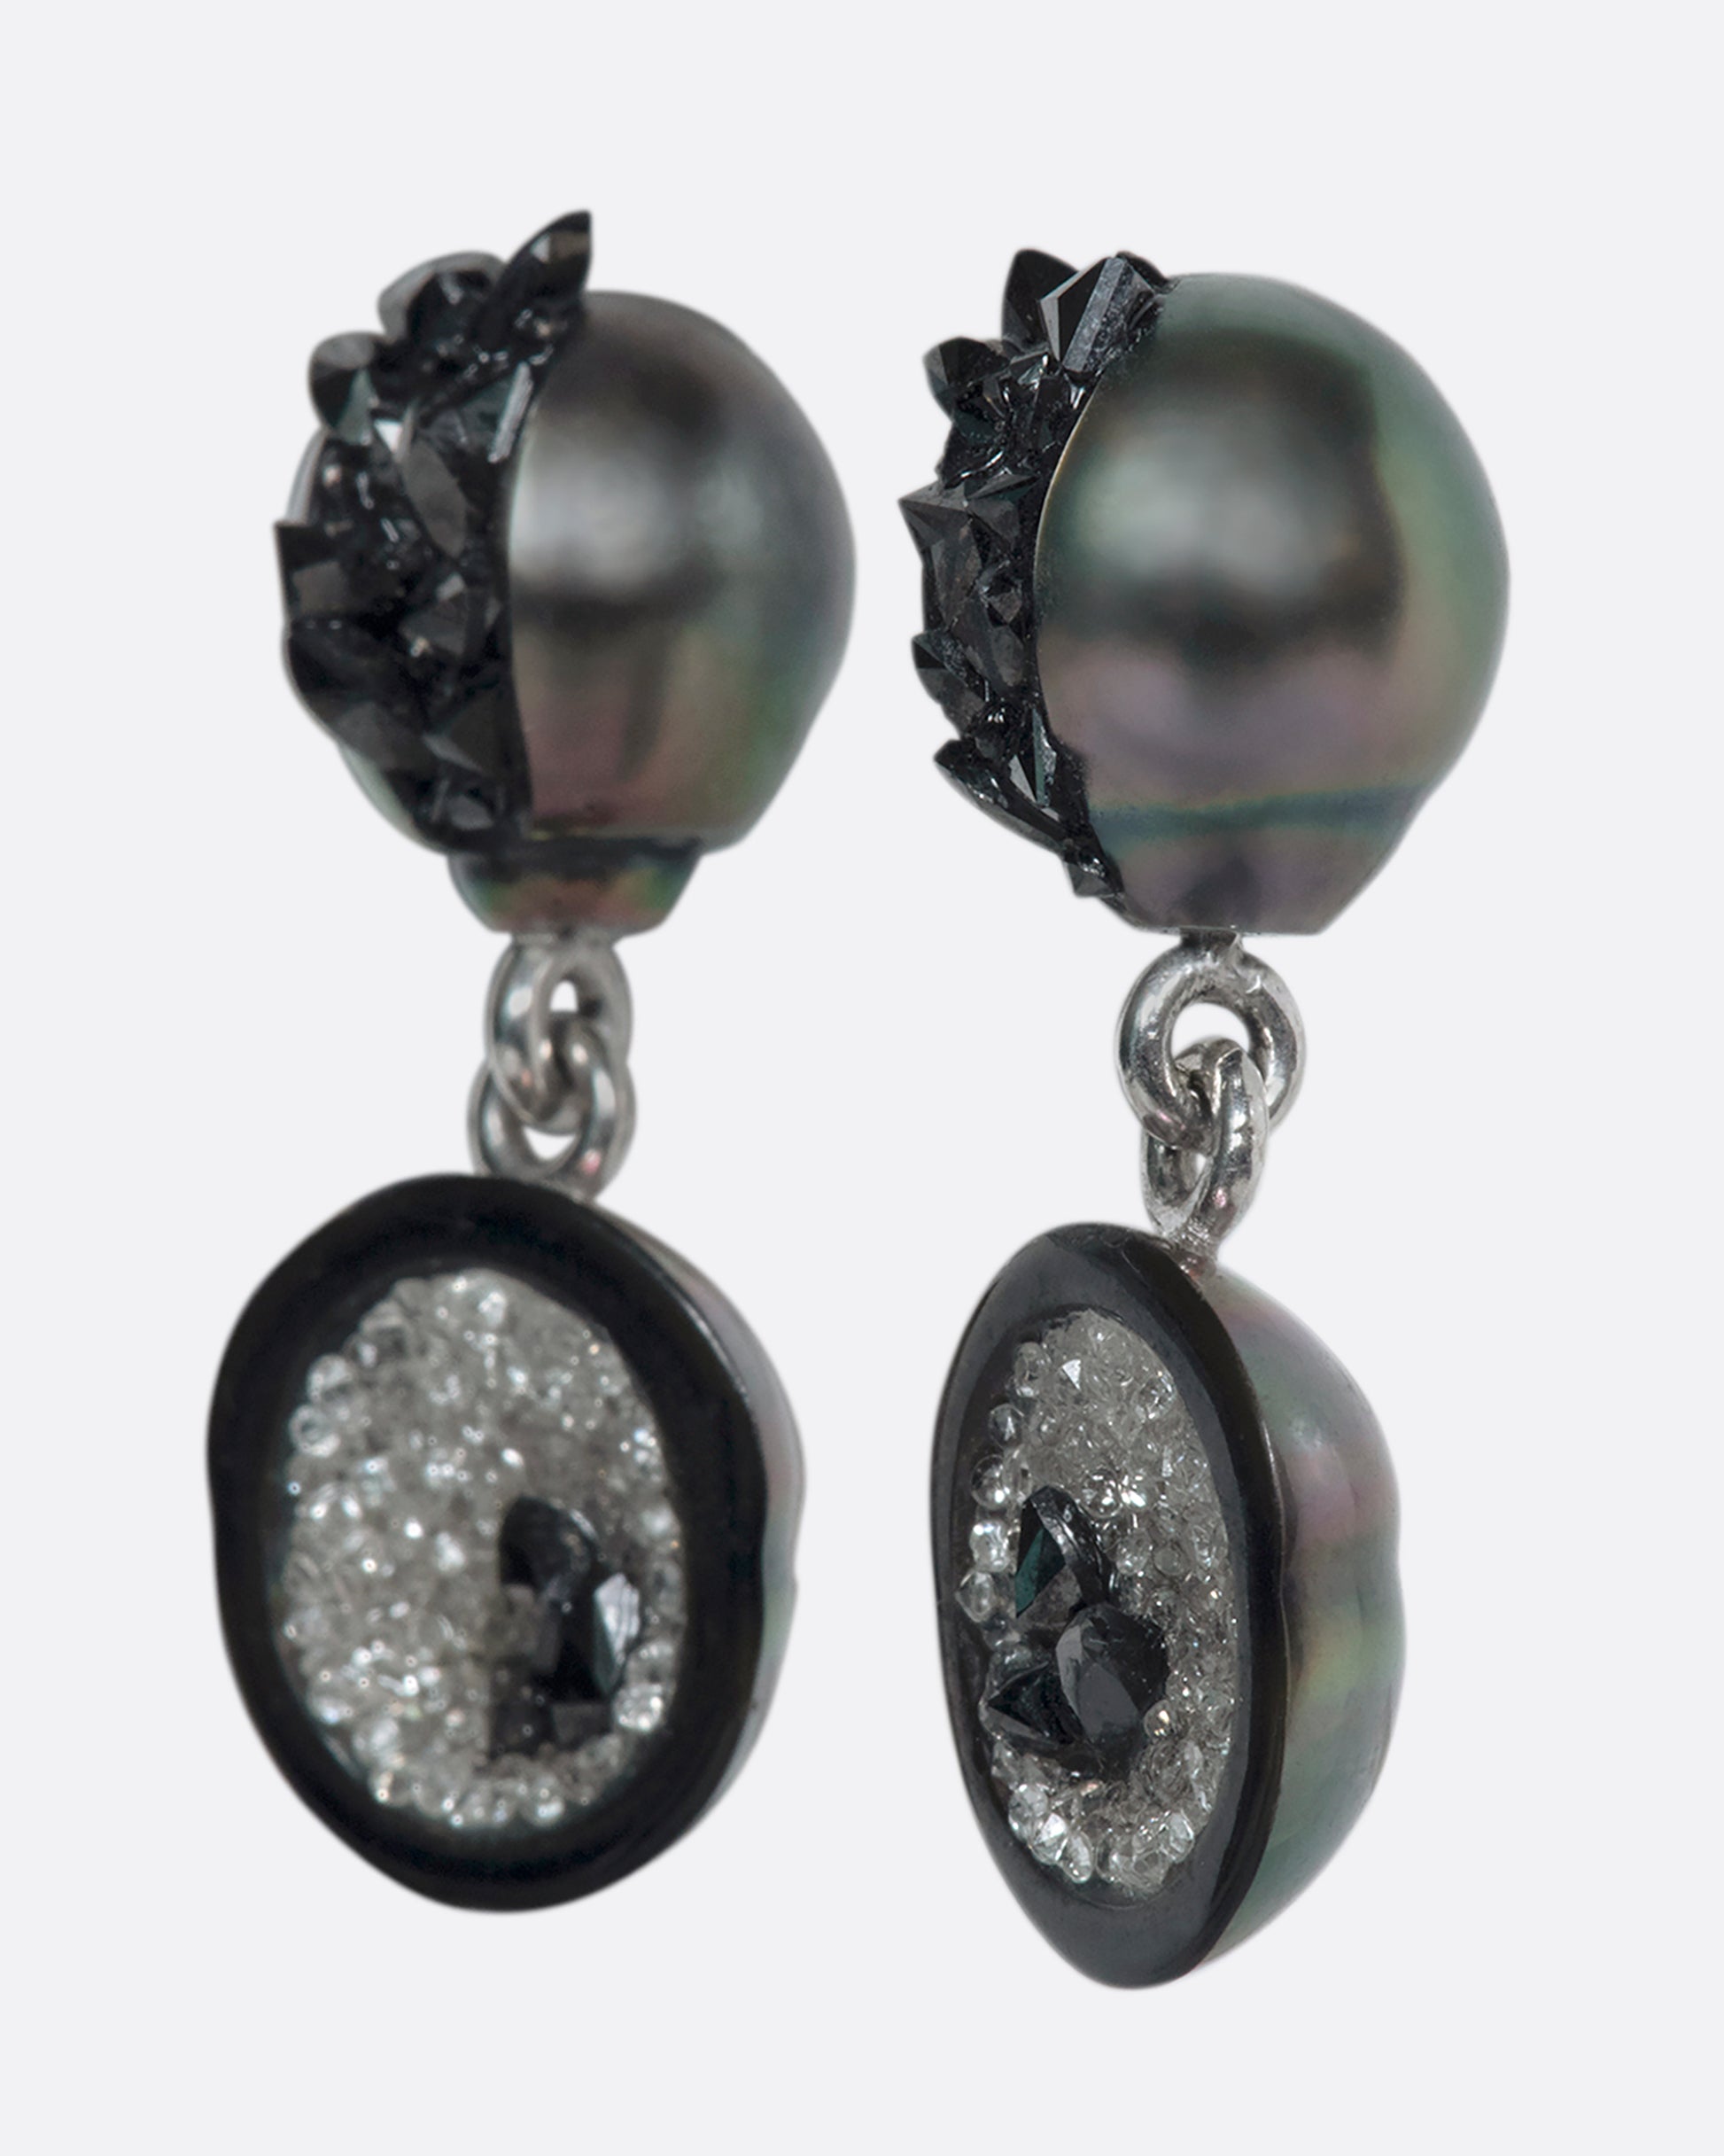 Double-drop Tahitian pearl earrings with 14k white gold posts. The top pearls are bursting with spiky black diamond shards, while the bottom pearls are delicately lined with tiny white and black diamonds.